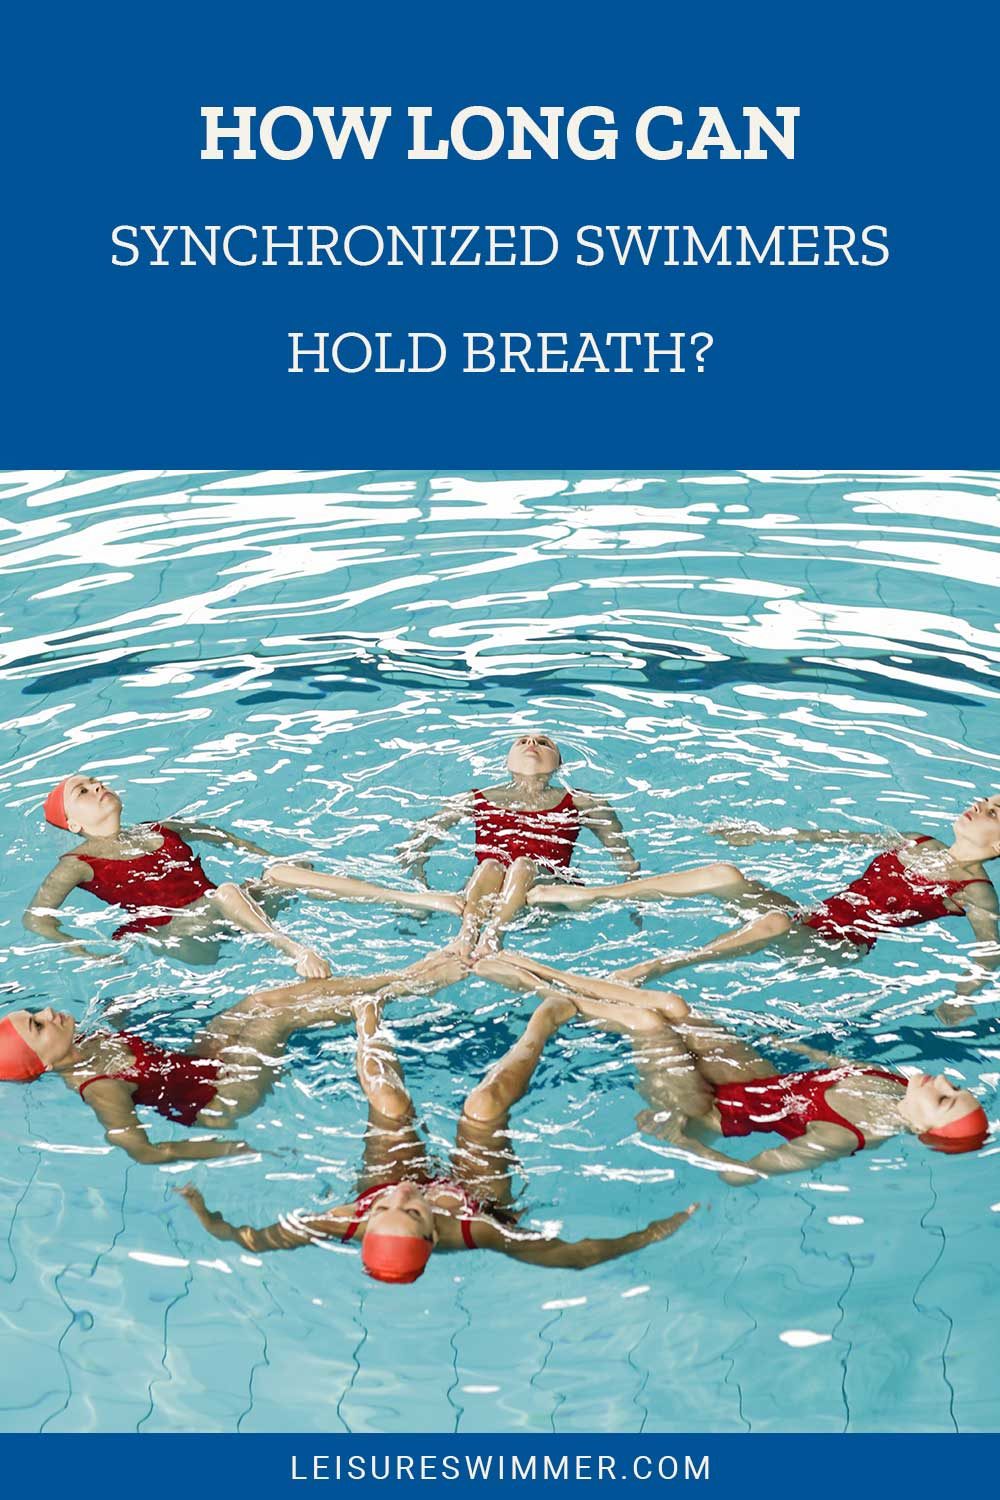 Six synchronized swimmers in a pool - How Long Can they Hold Breath?